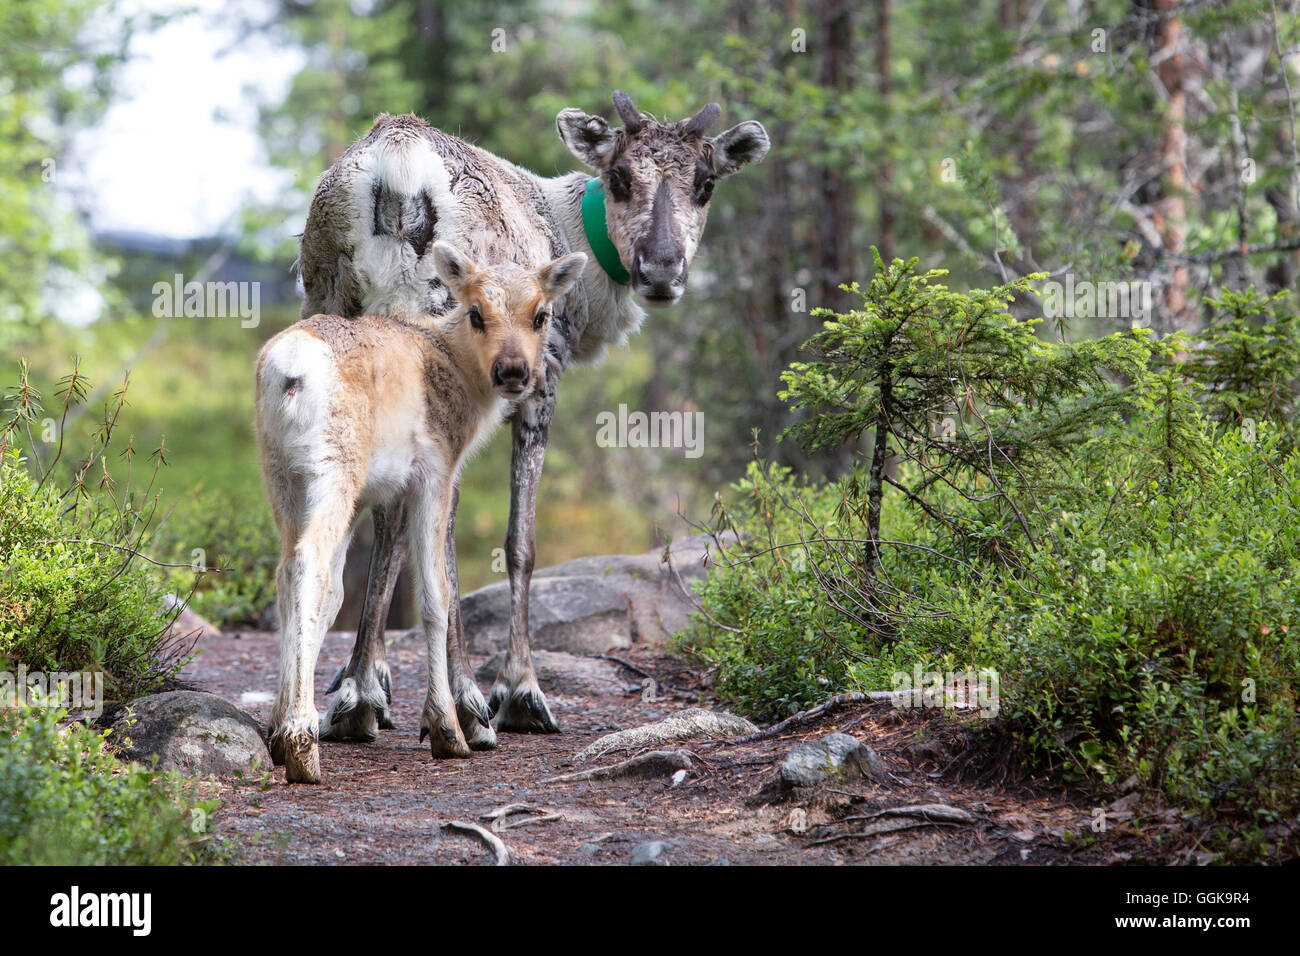 Reindeer and young animal, Oulanka National Park, Northern Ostrobothnia, Finland Stock Photo